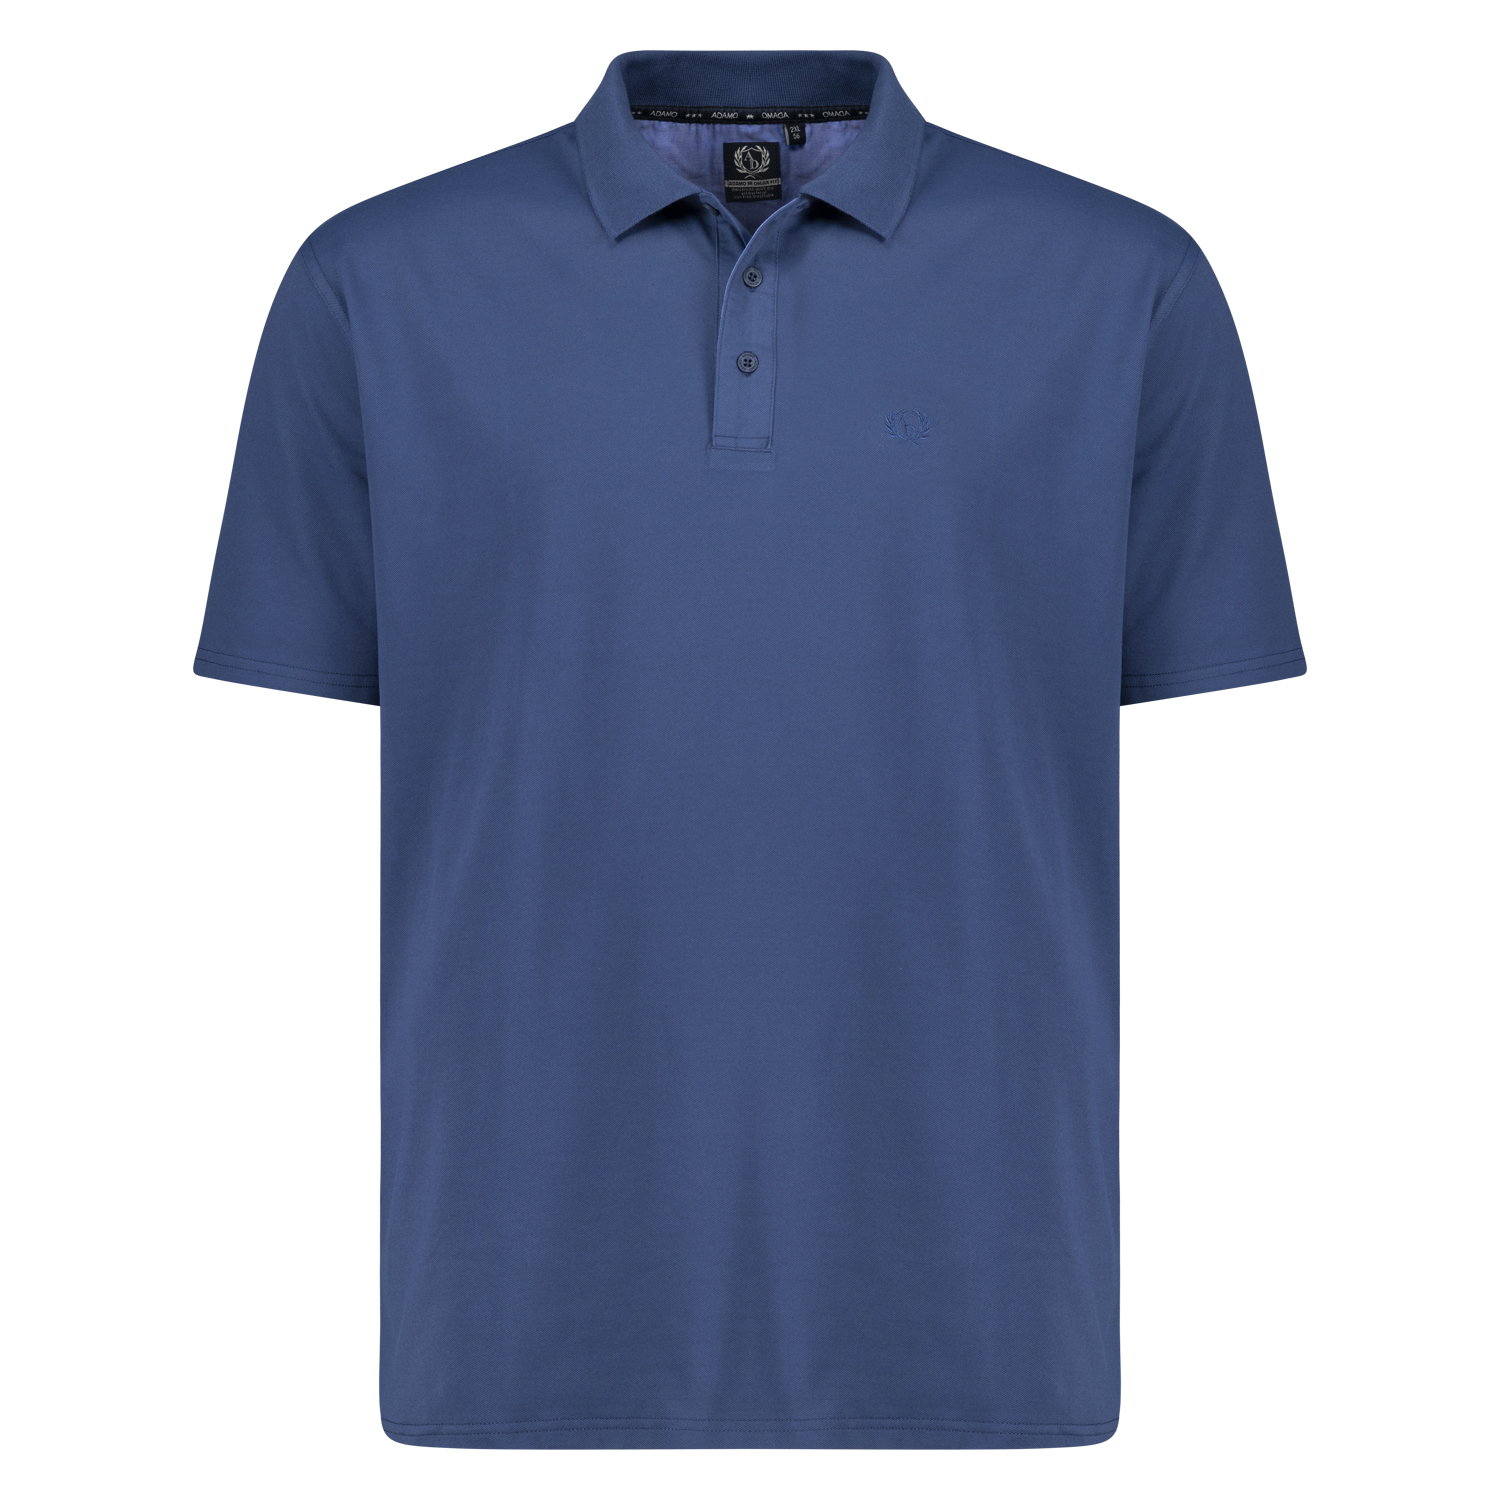 Blue functional polo shirt for men by Adamo series "PEER" Tall Fit extra long in long sizes up to 5XLT